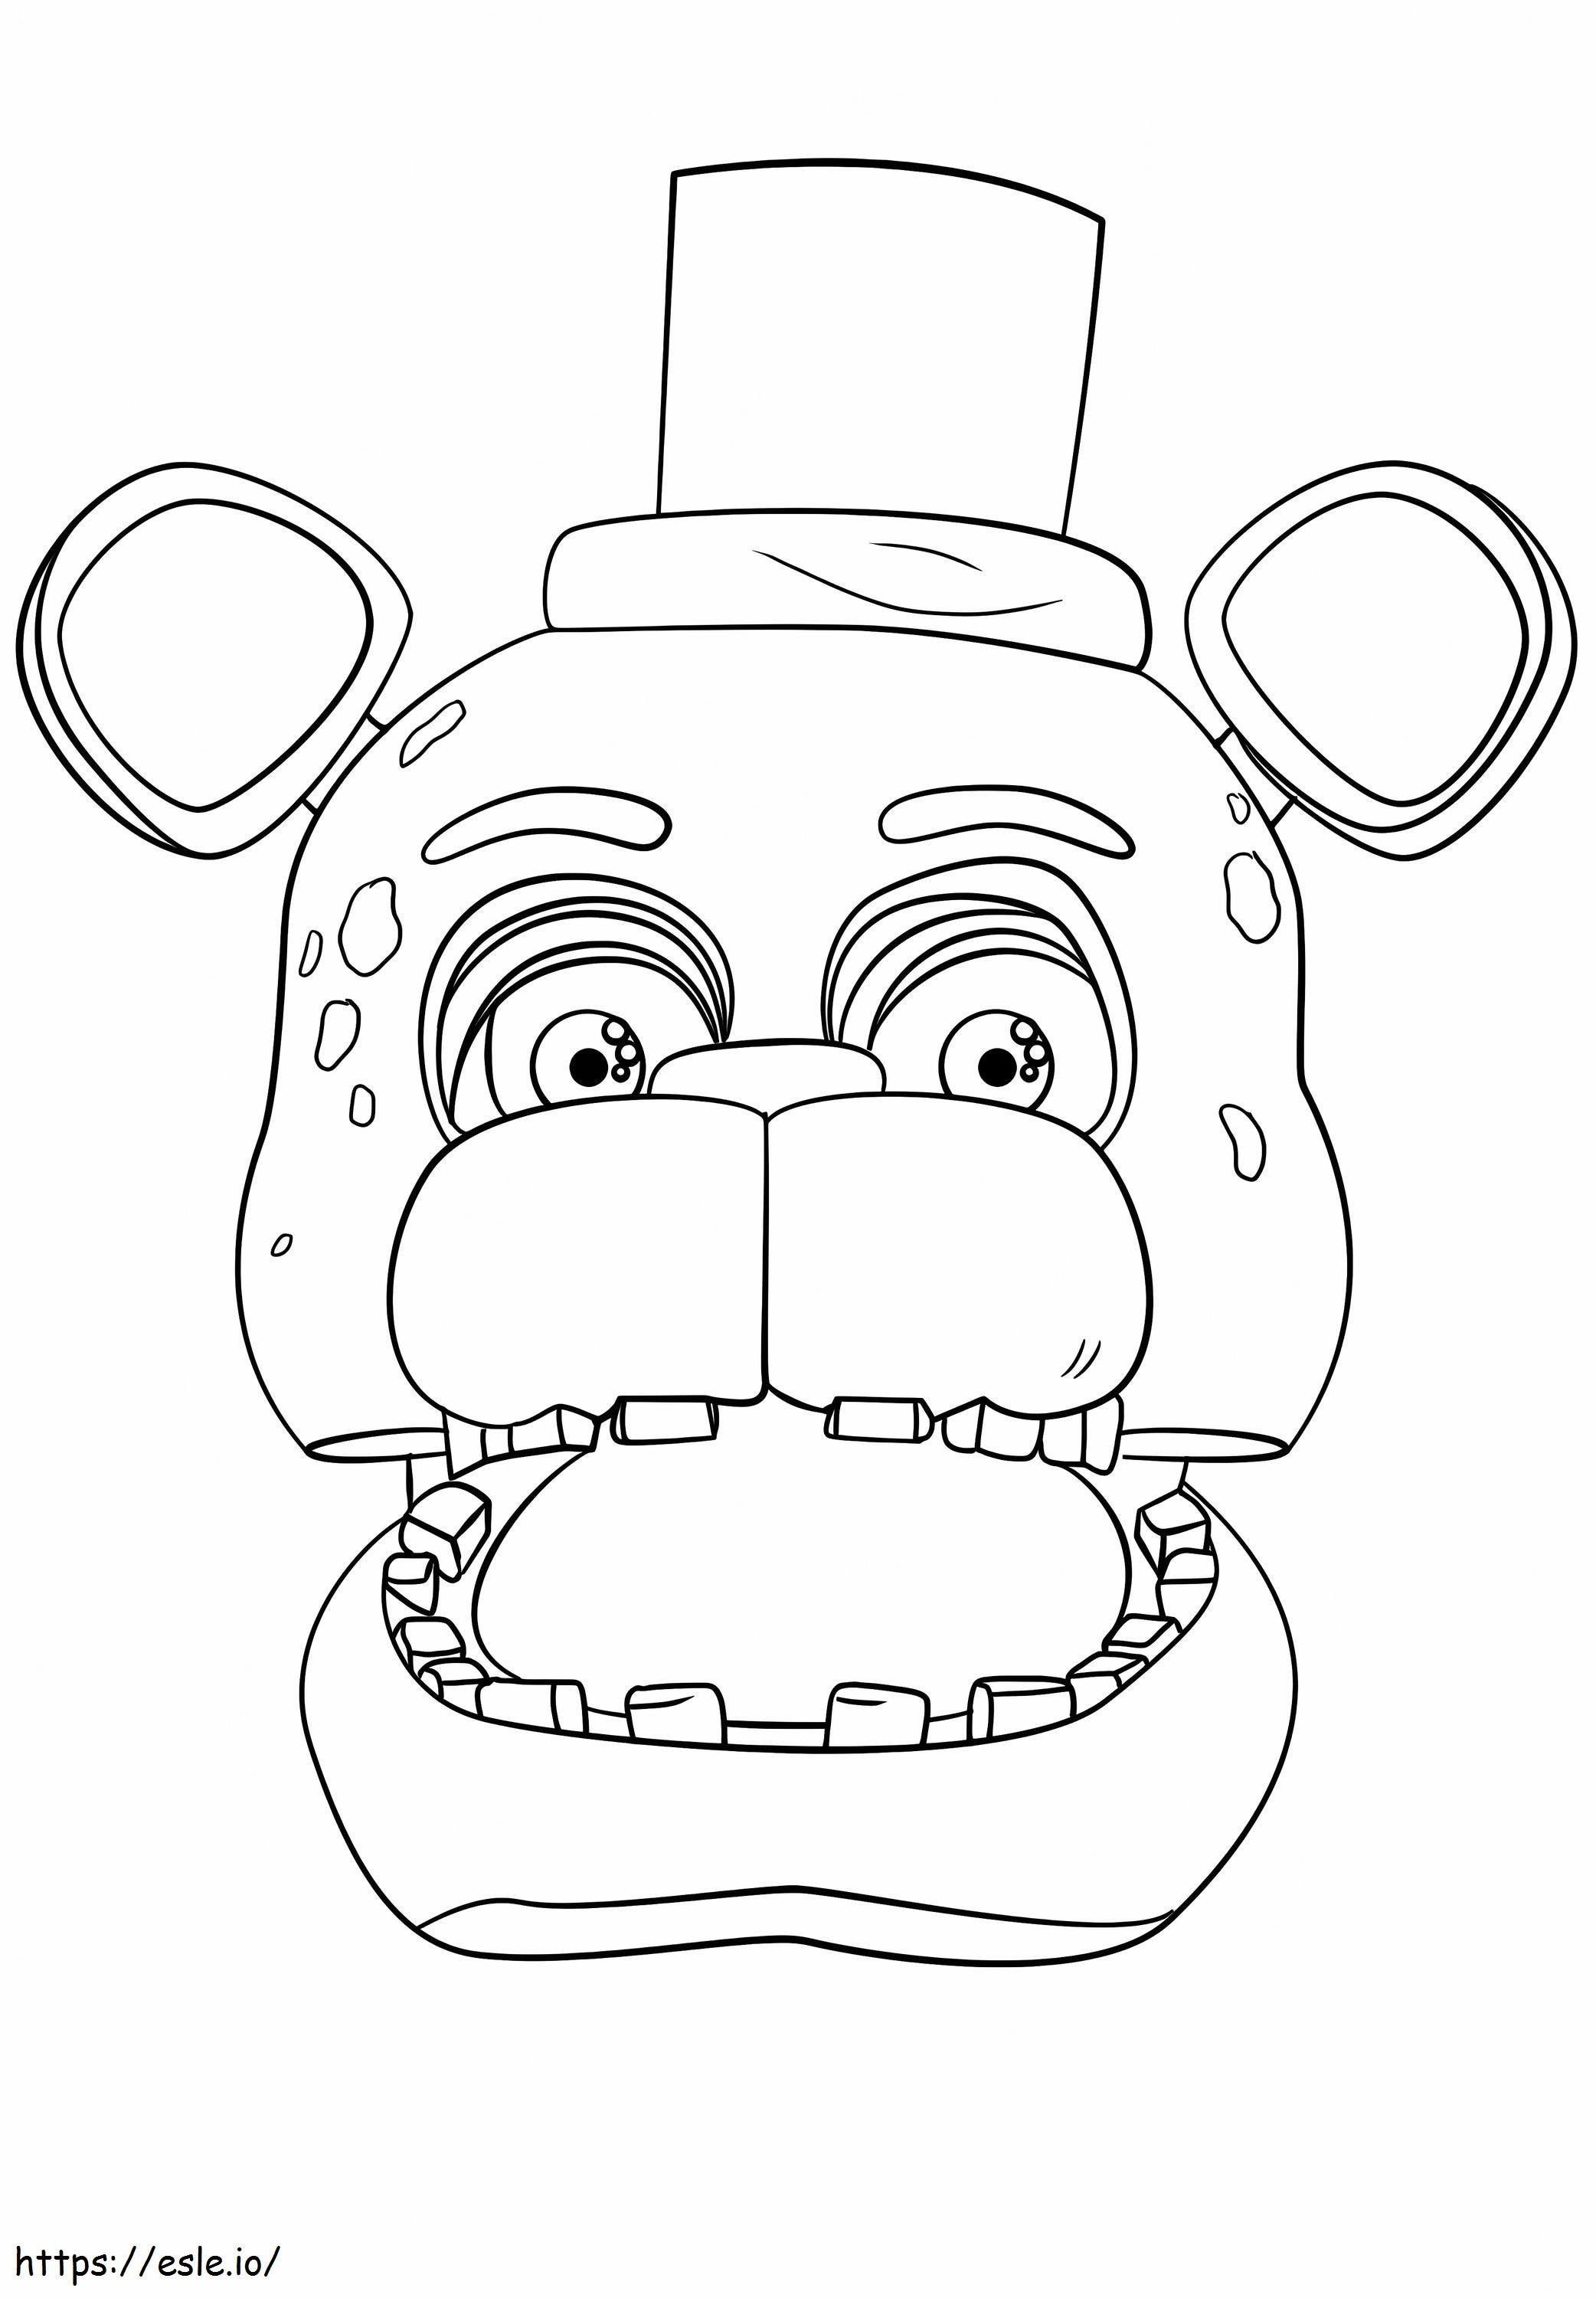 1578453483 Five Nights At Freddyamp039S Coloring Book Inspirational Free Printable Five Nights At Freddy S Fnaf Of Five Nights At Freddy039S Coloring Book coloring page